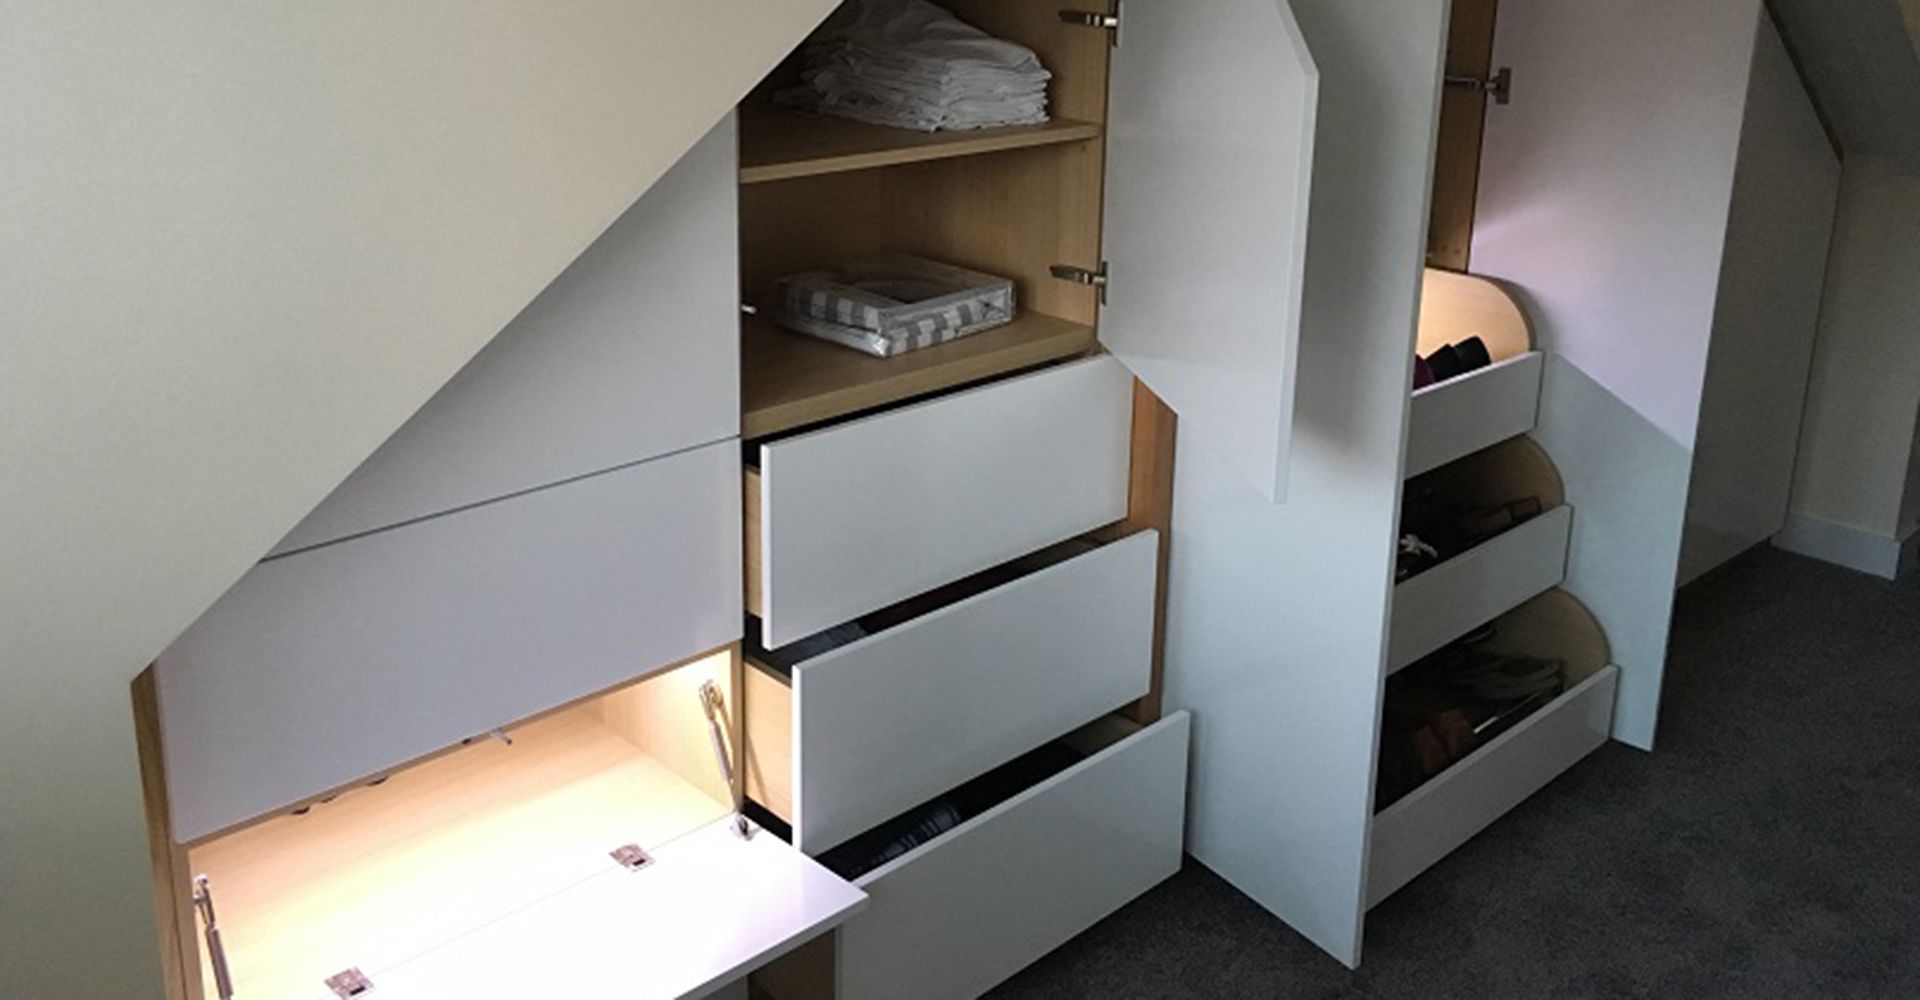 Built In Wardrobes Kent | Fitted Wardrobes | Spittlywood Ltd In Kent Wardrobes (Gallery 13 of 20)